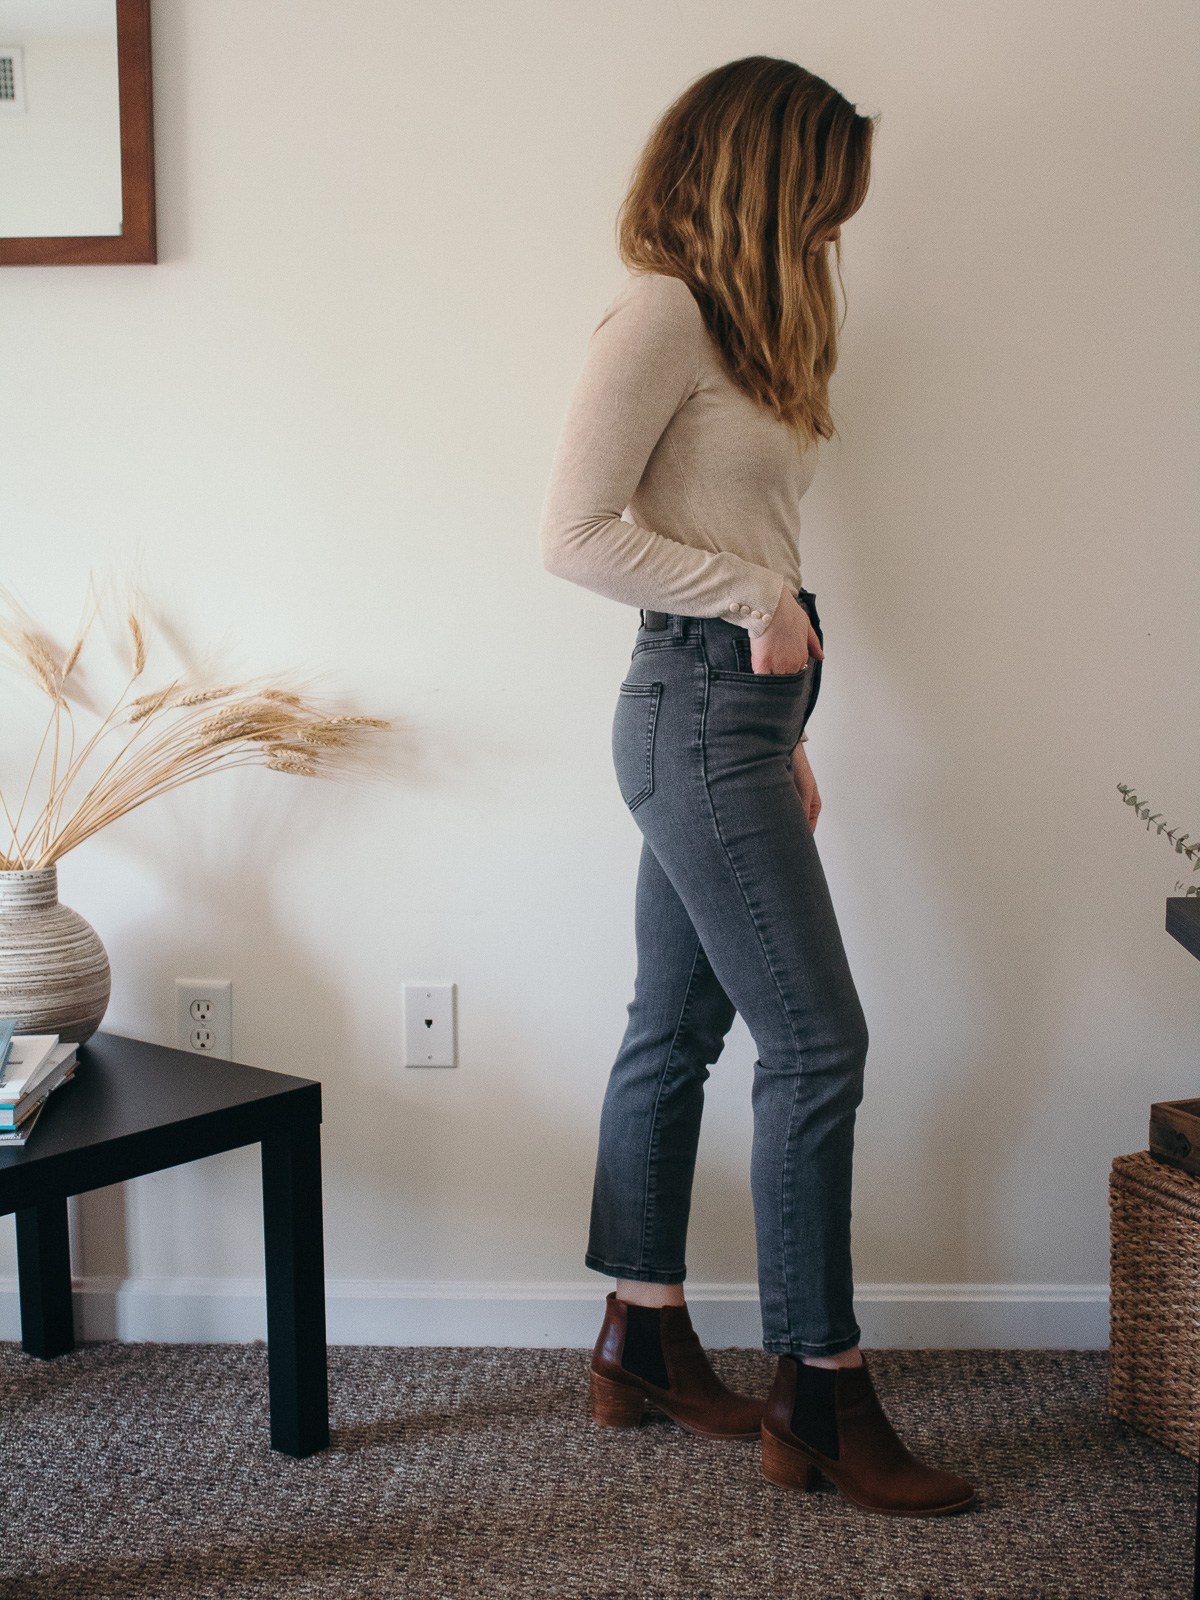 Everlane Jeans Review